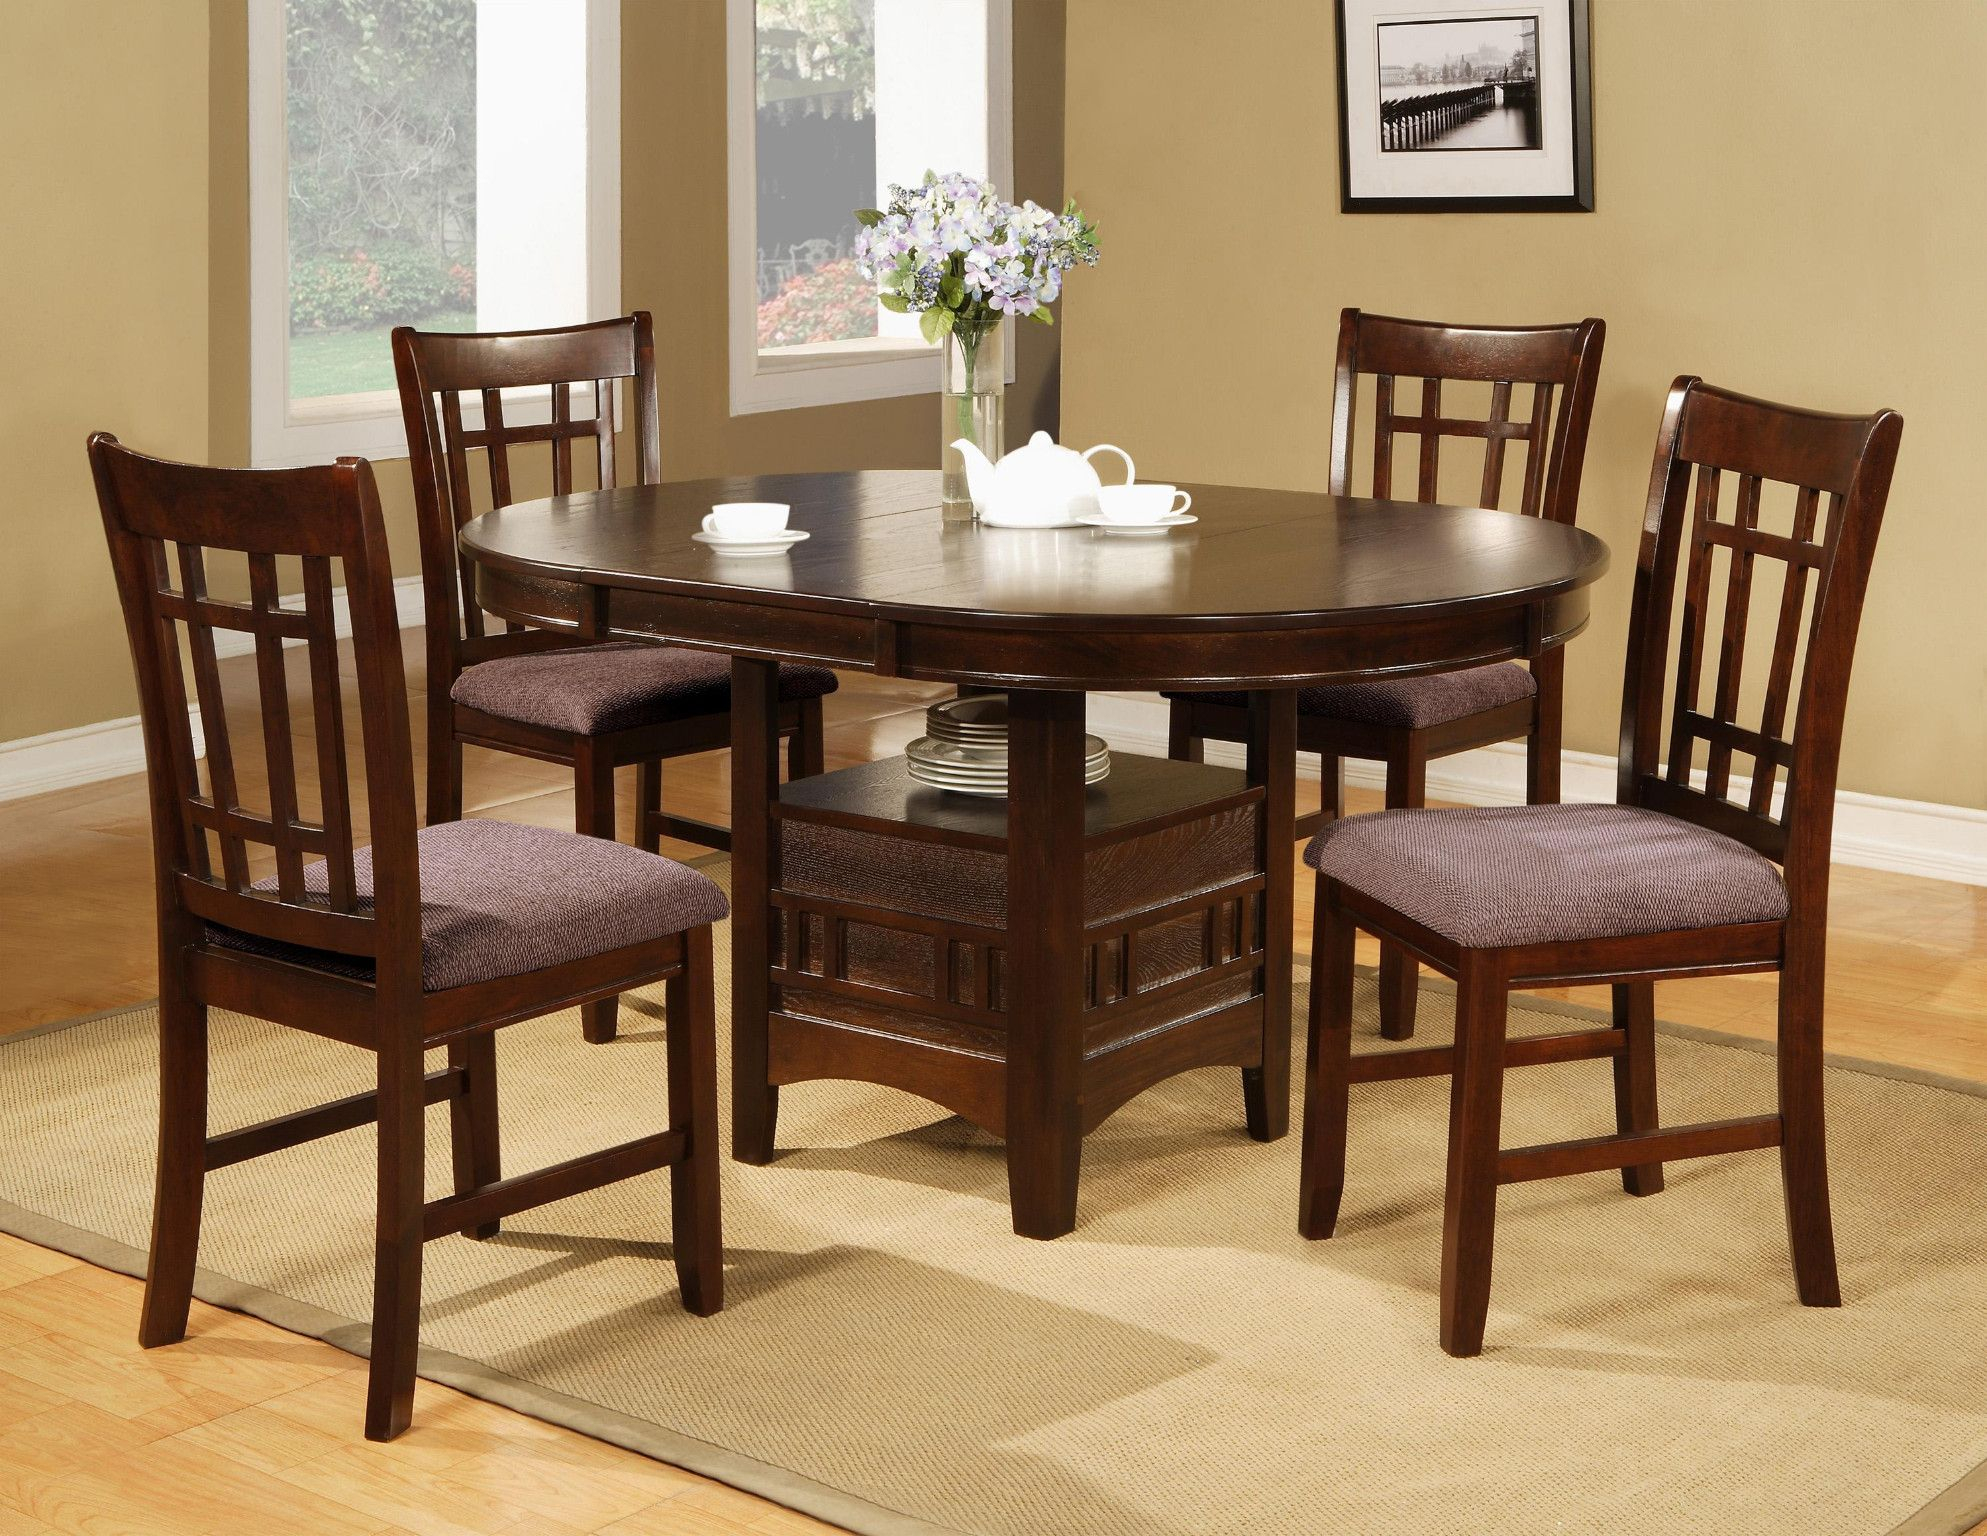 Empire 5 Piece Dinette Table And 4 Chairs 56800 Table intended for size 1987 X 1536